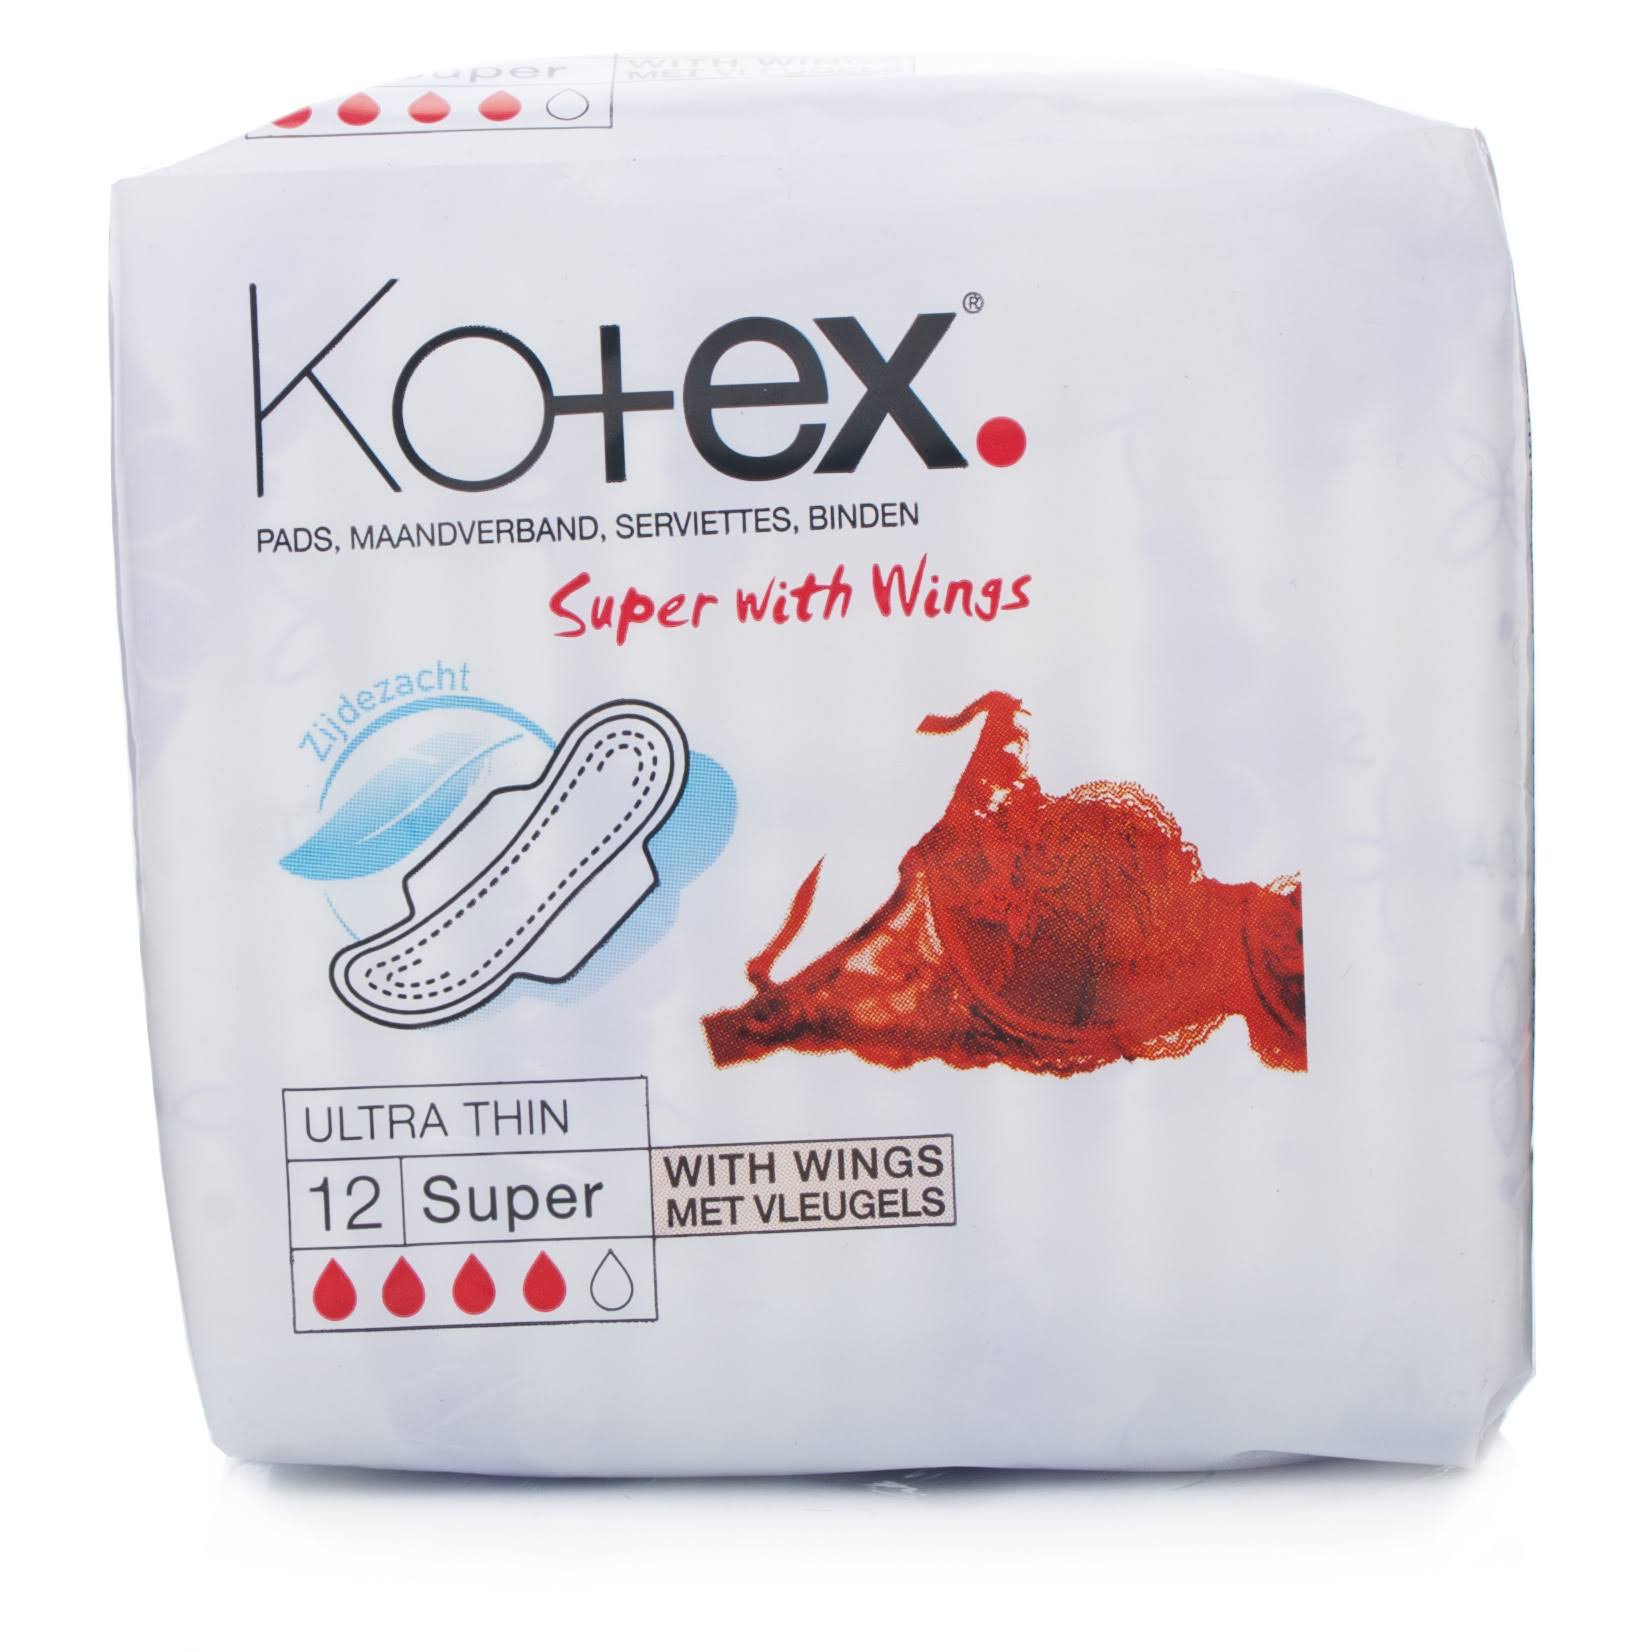 Kotex Ultra Thin Pads - Super With Wings, 12pk